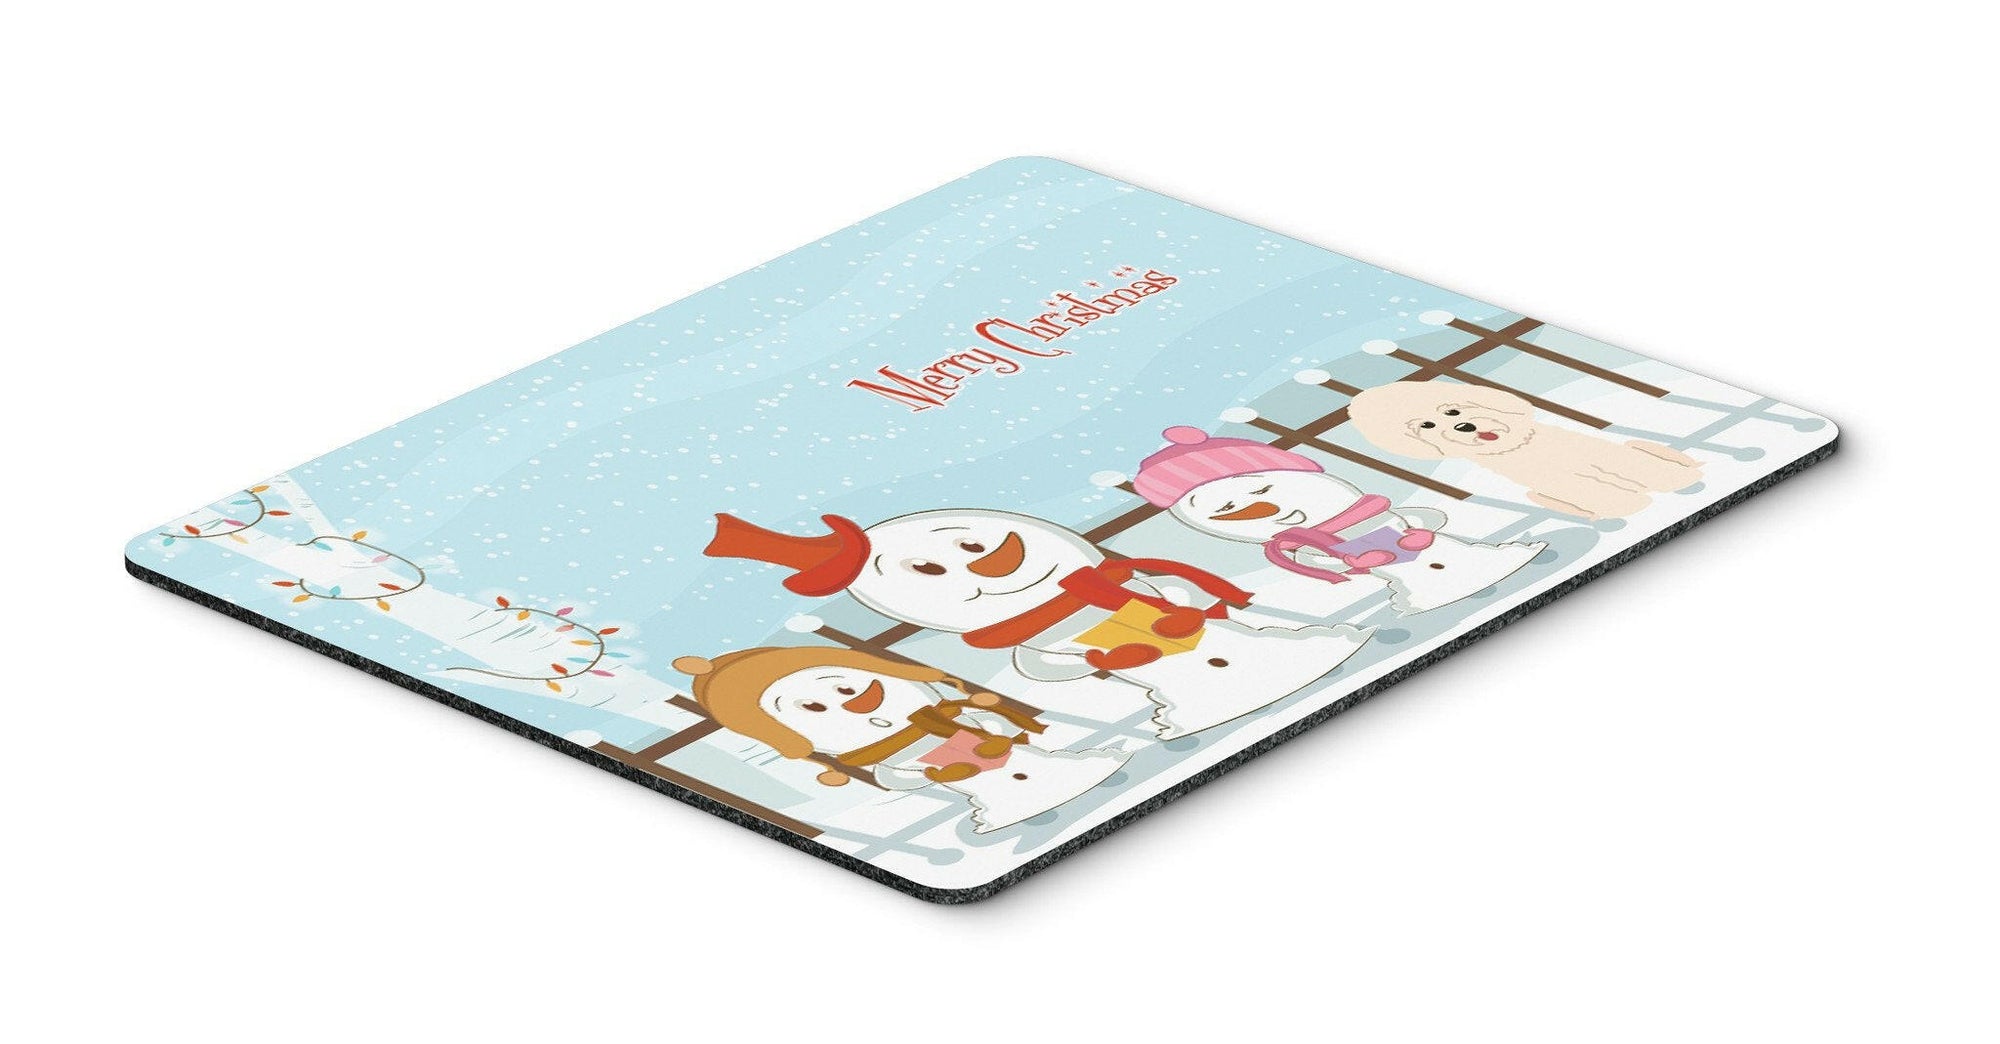 Merry Christmas Carolers Bichon Frise Mouse Pad, Hot Pad or Trivet BB2406MP by Caroline's Treasures